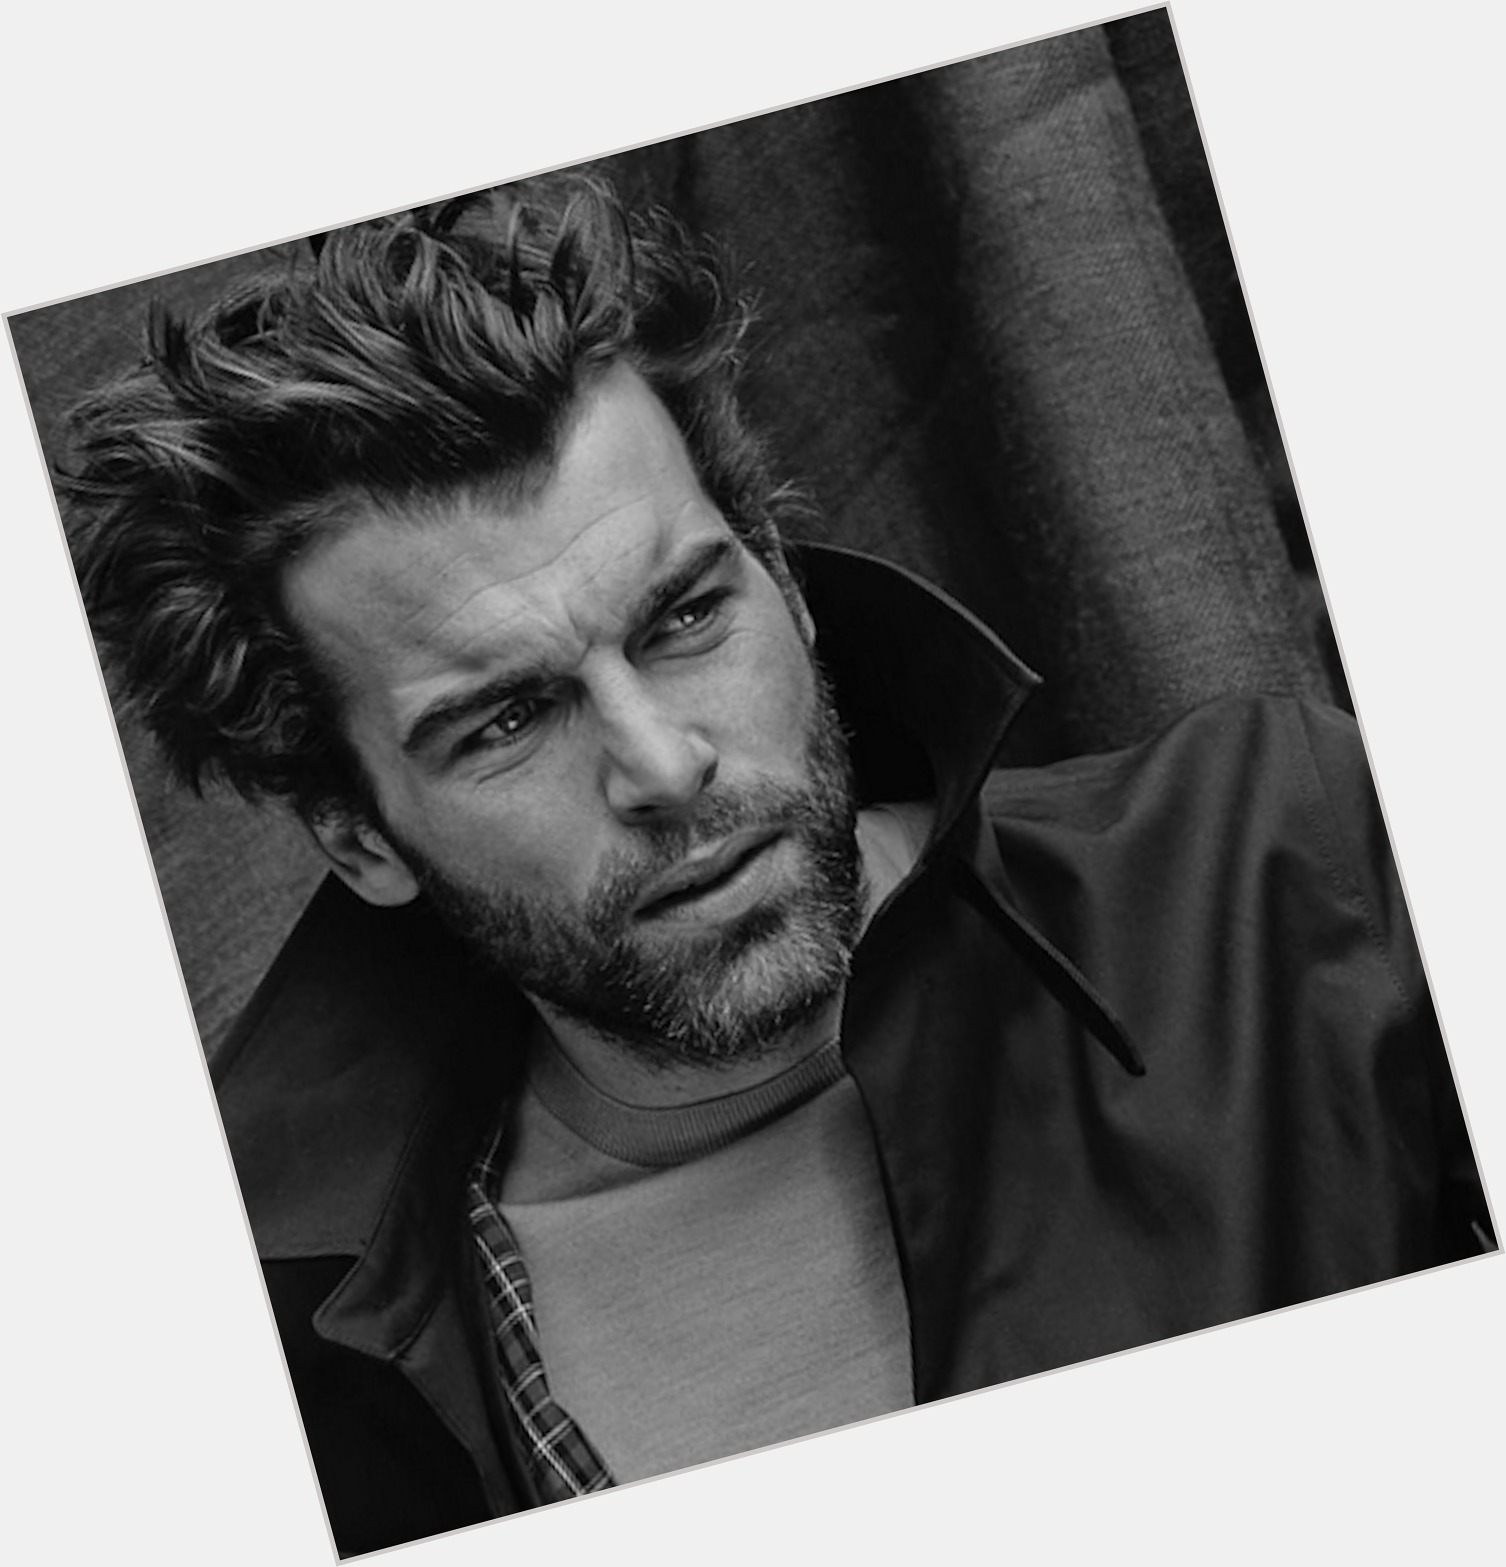 <a href="/hot-men/stanley-weber/where-dating-news-photos">Stanley Weber</a> Athletic body,  light brown hair & hairstyles